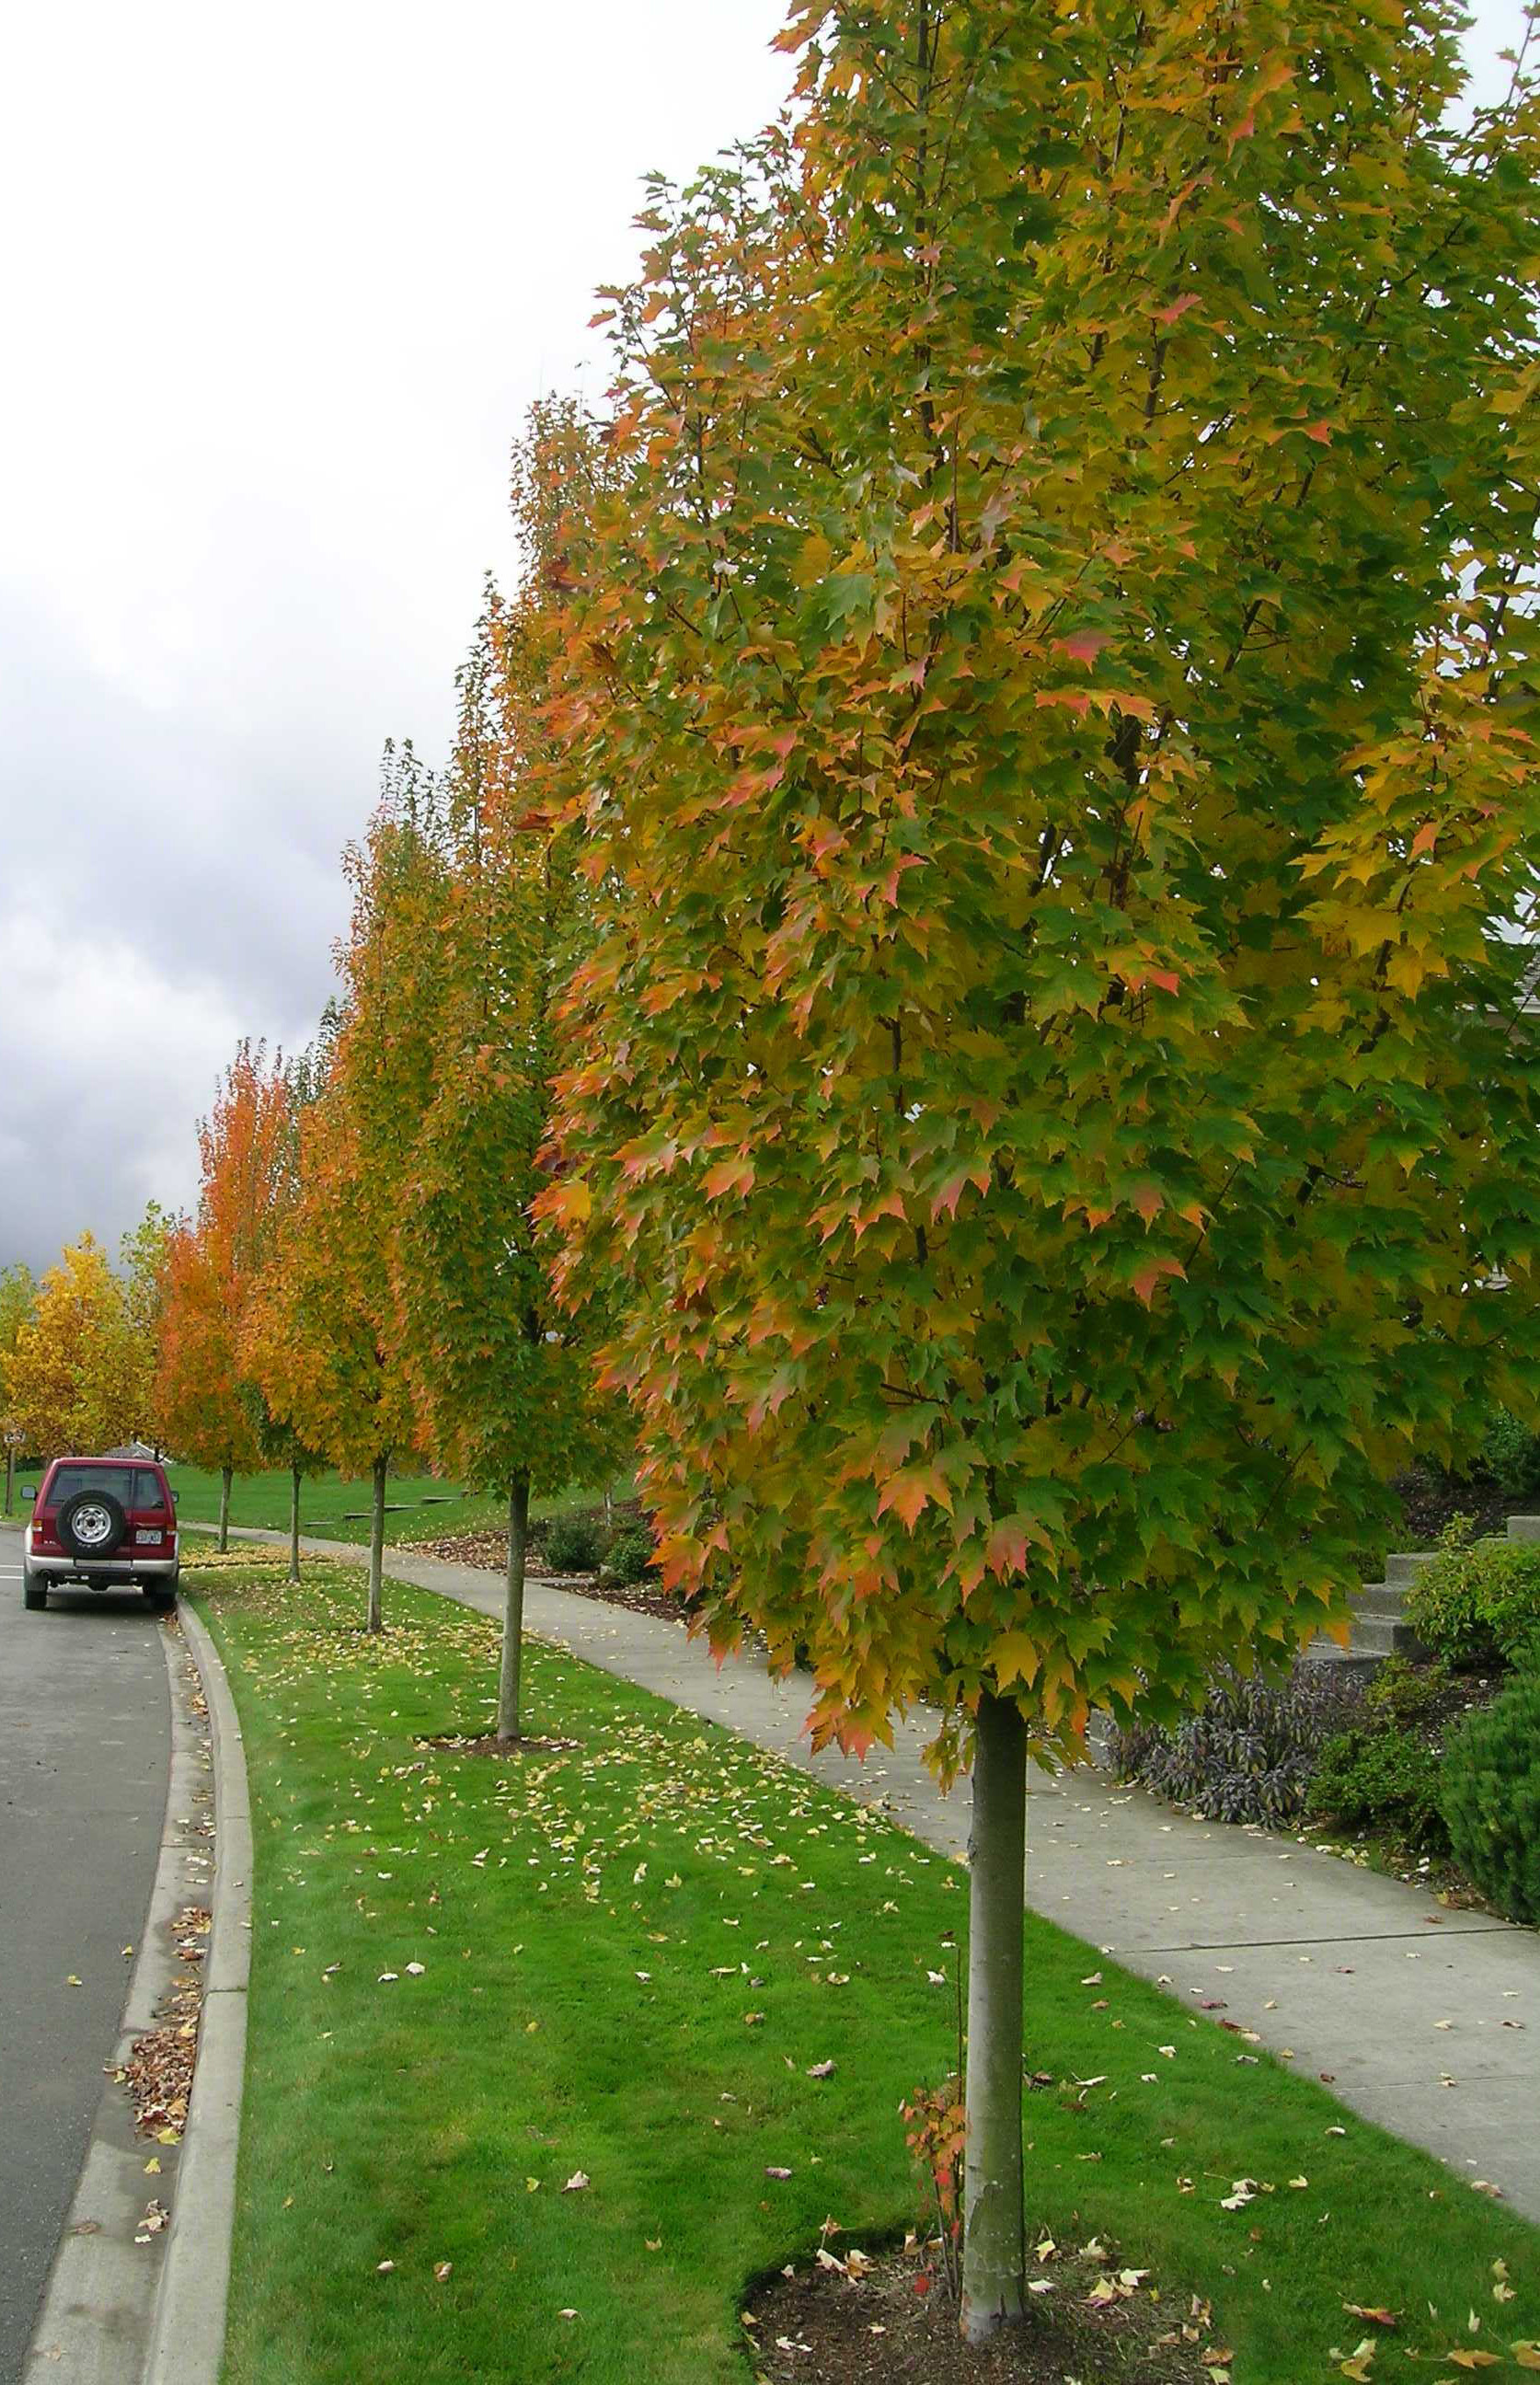 Red Maple Tree For Sale Wholesale | Buy Trees in Bulk